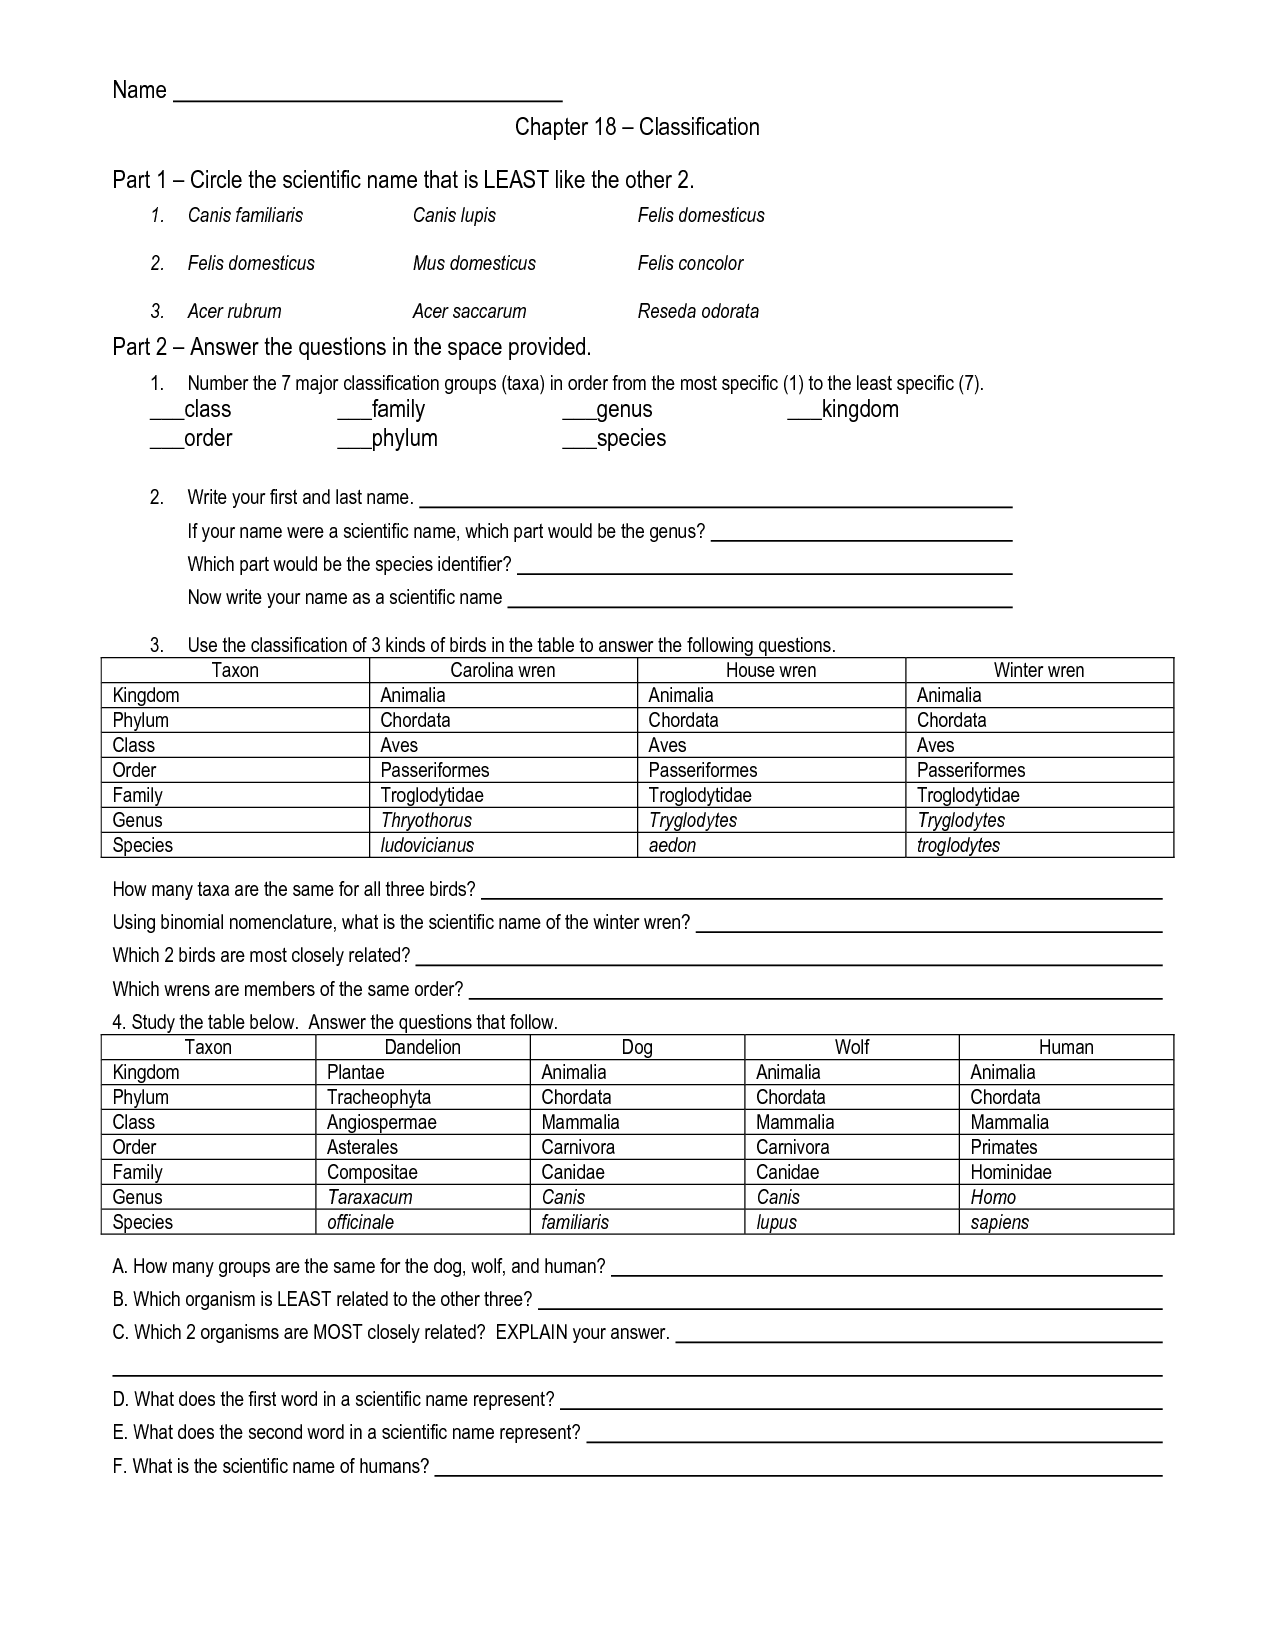 11-best-images-of-scientific-classification-worksheet-taxonomy-concept-map-worksheet-answers